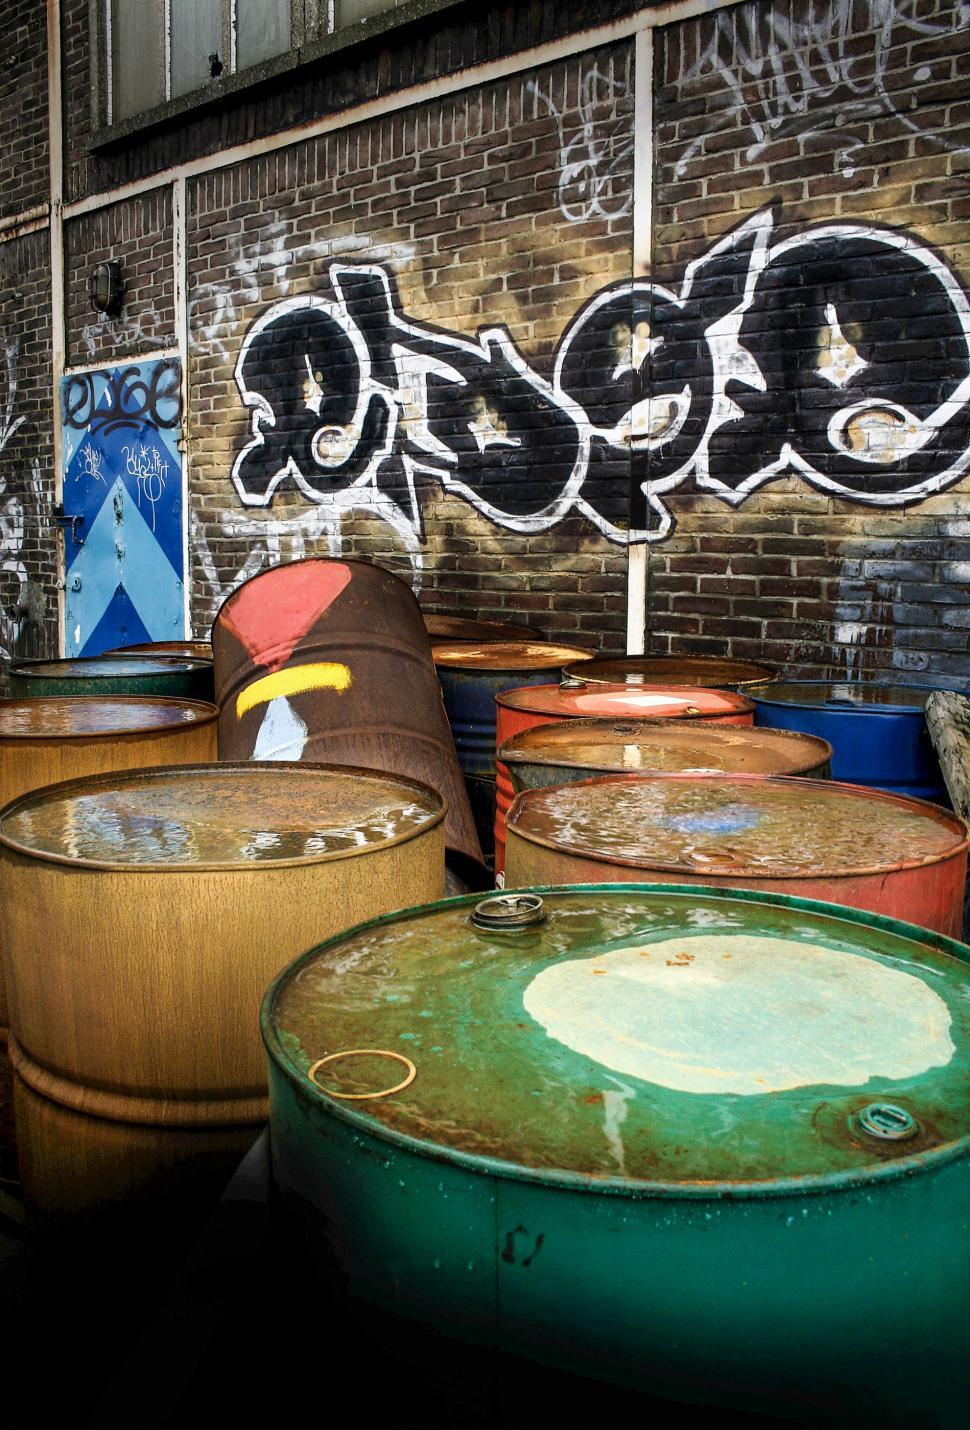 Free Image of Urban oil cans drums 